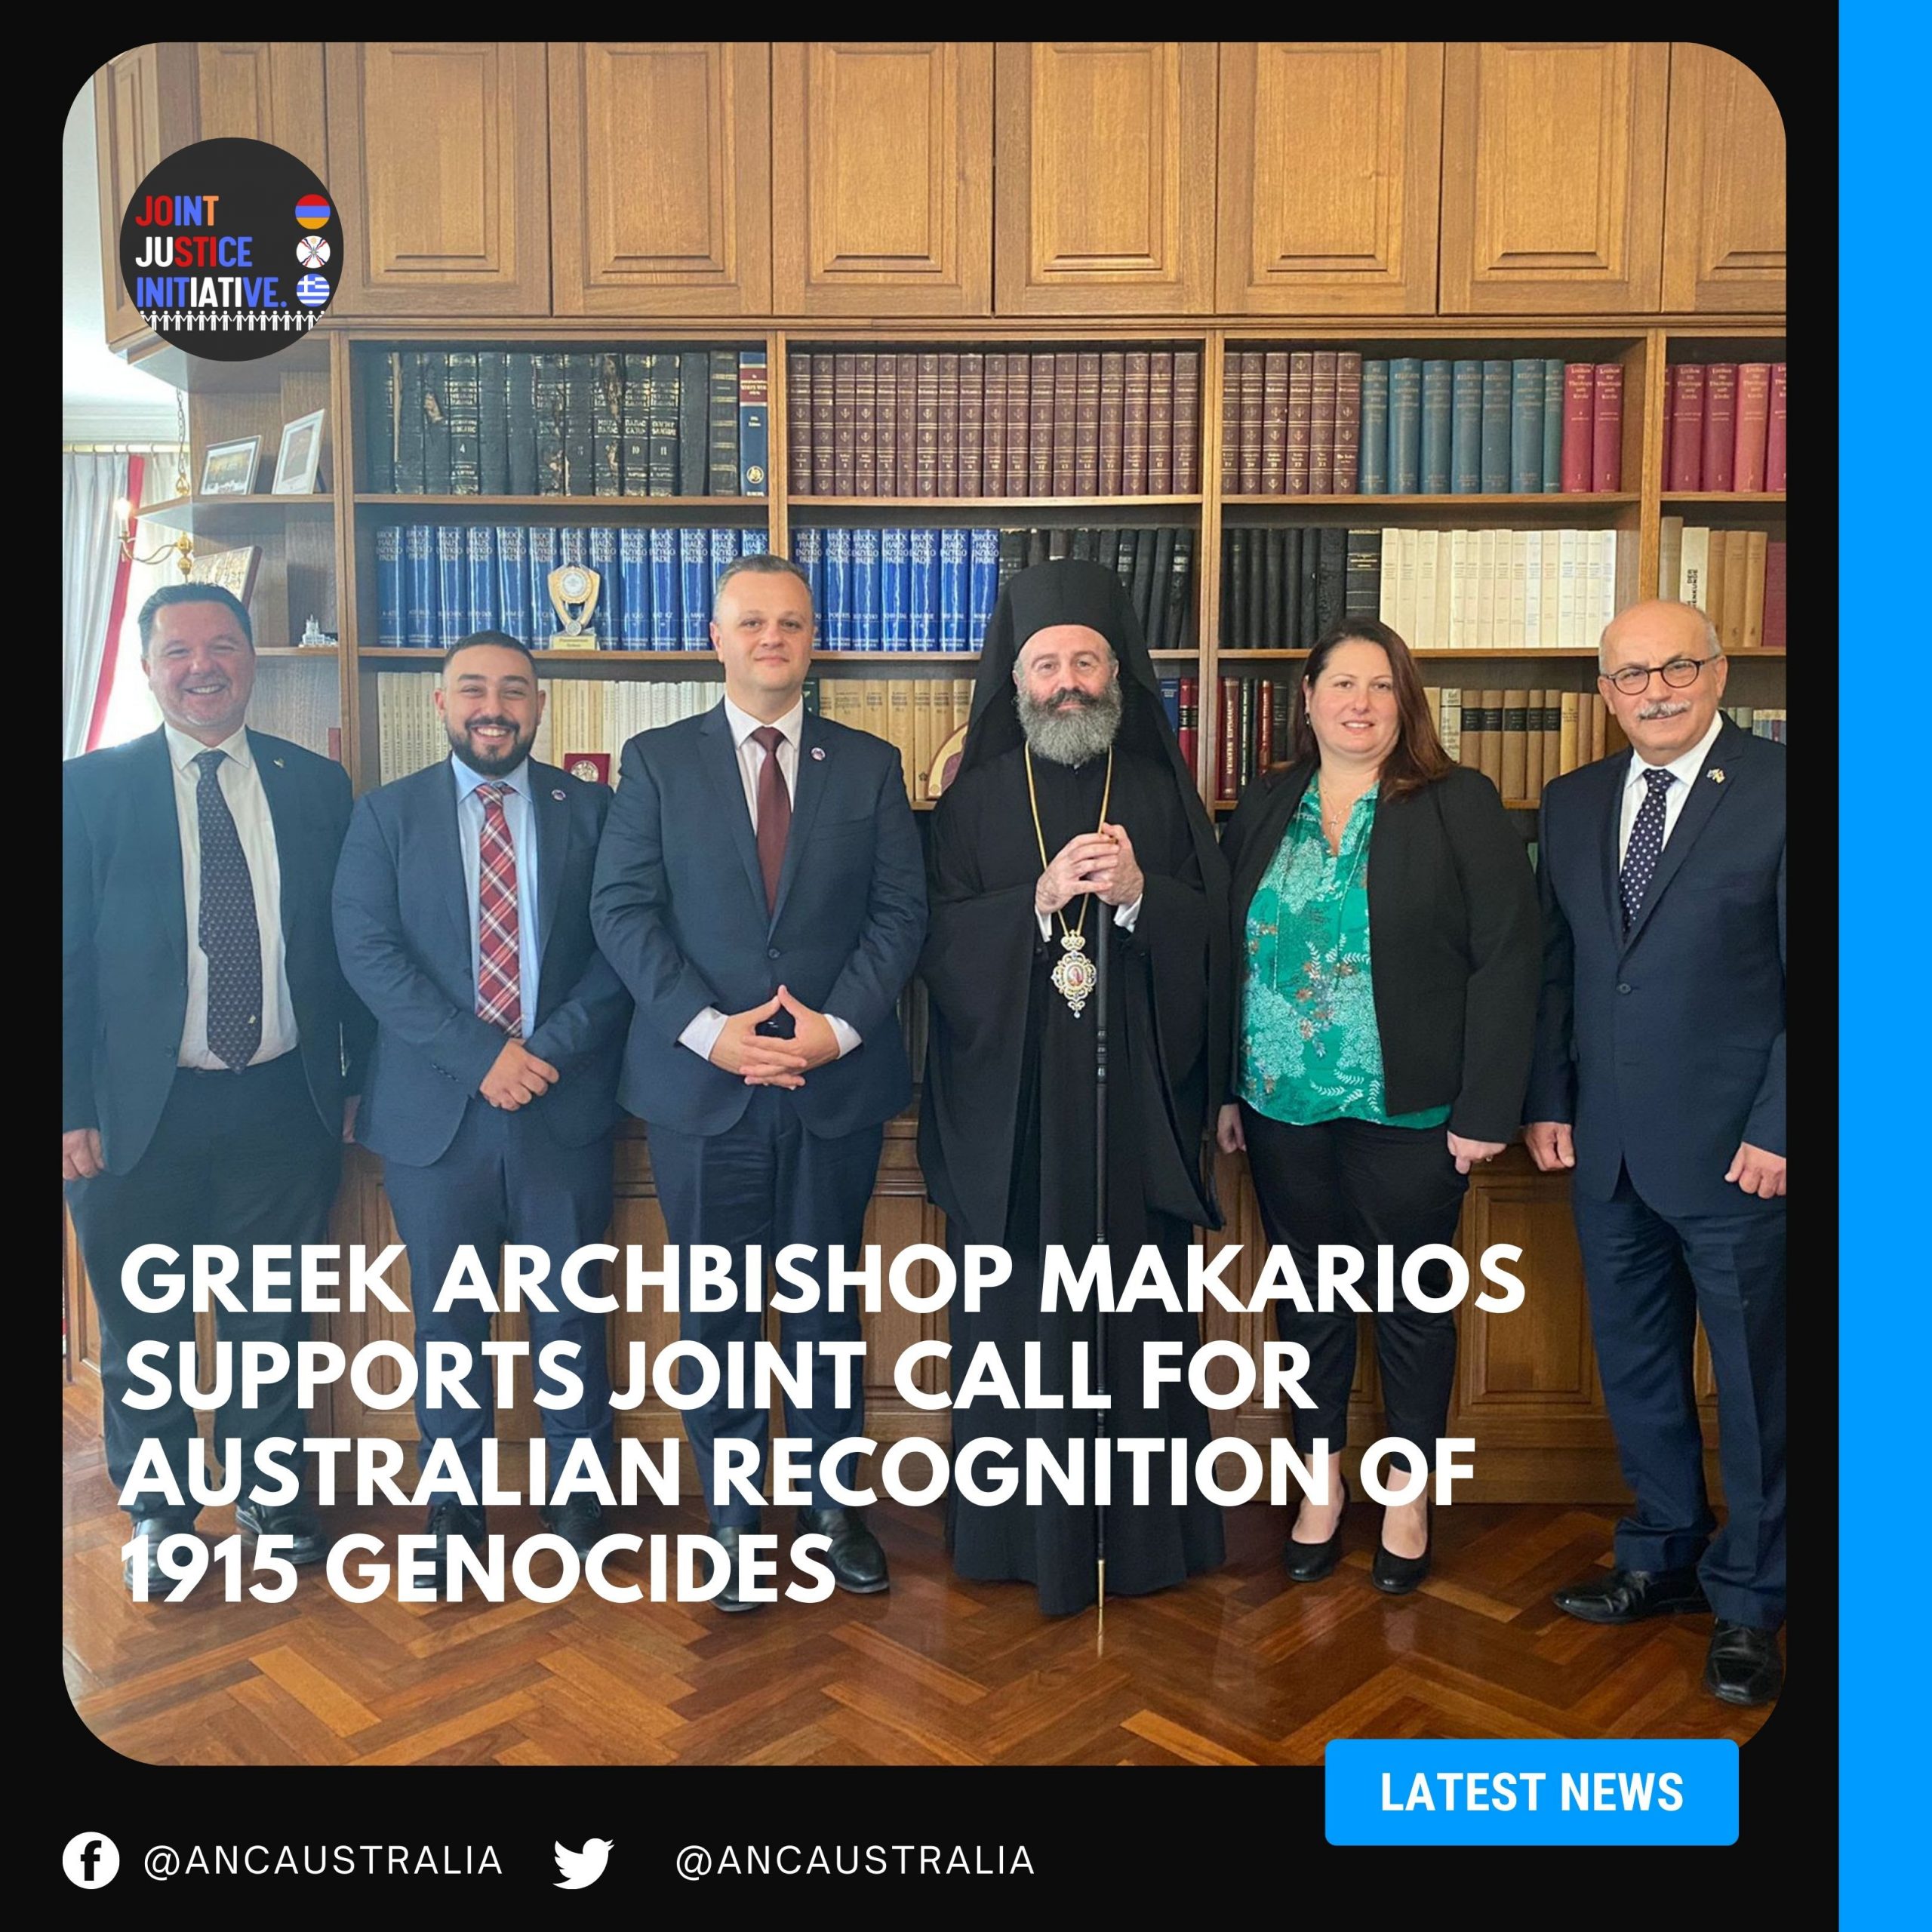 Greek Archbishop Makarios Supports Joint Justice Initiative Call for Australian Recognition of 1915 Genocides